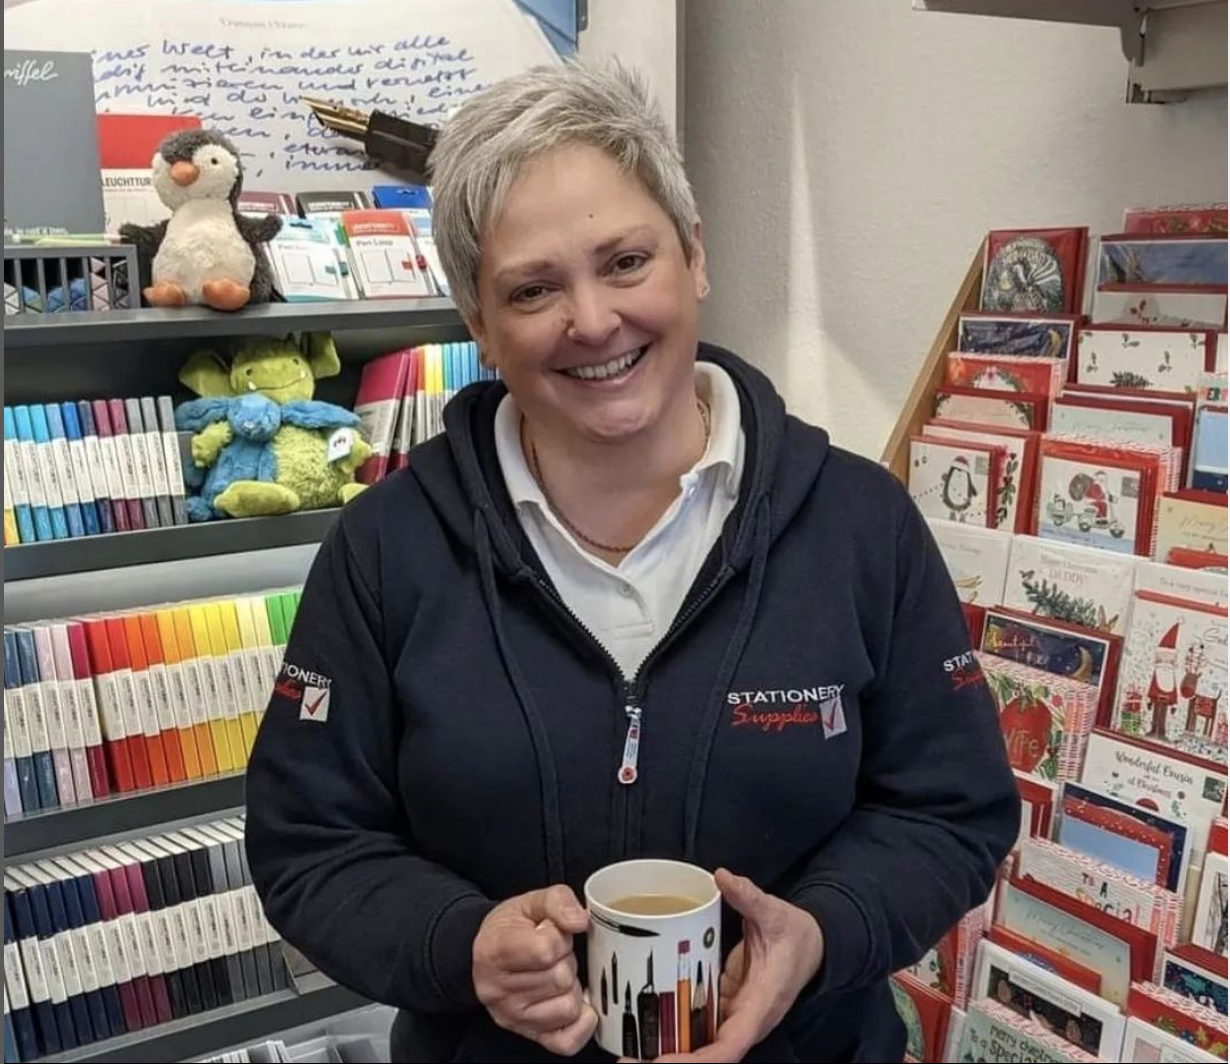 Above: Sarah Laker shared her top tips gleaned from her 18 years of retailing experience